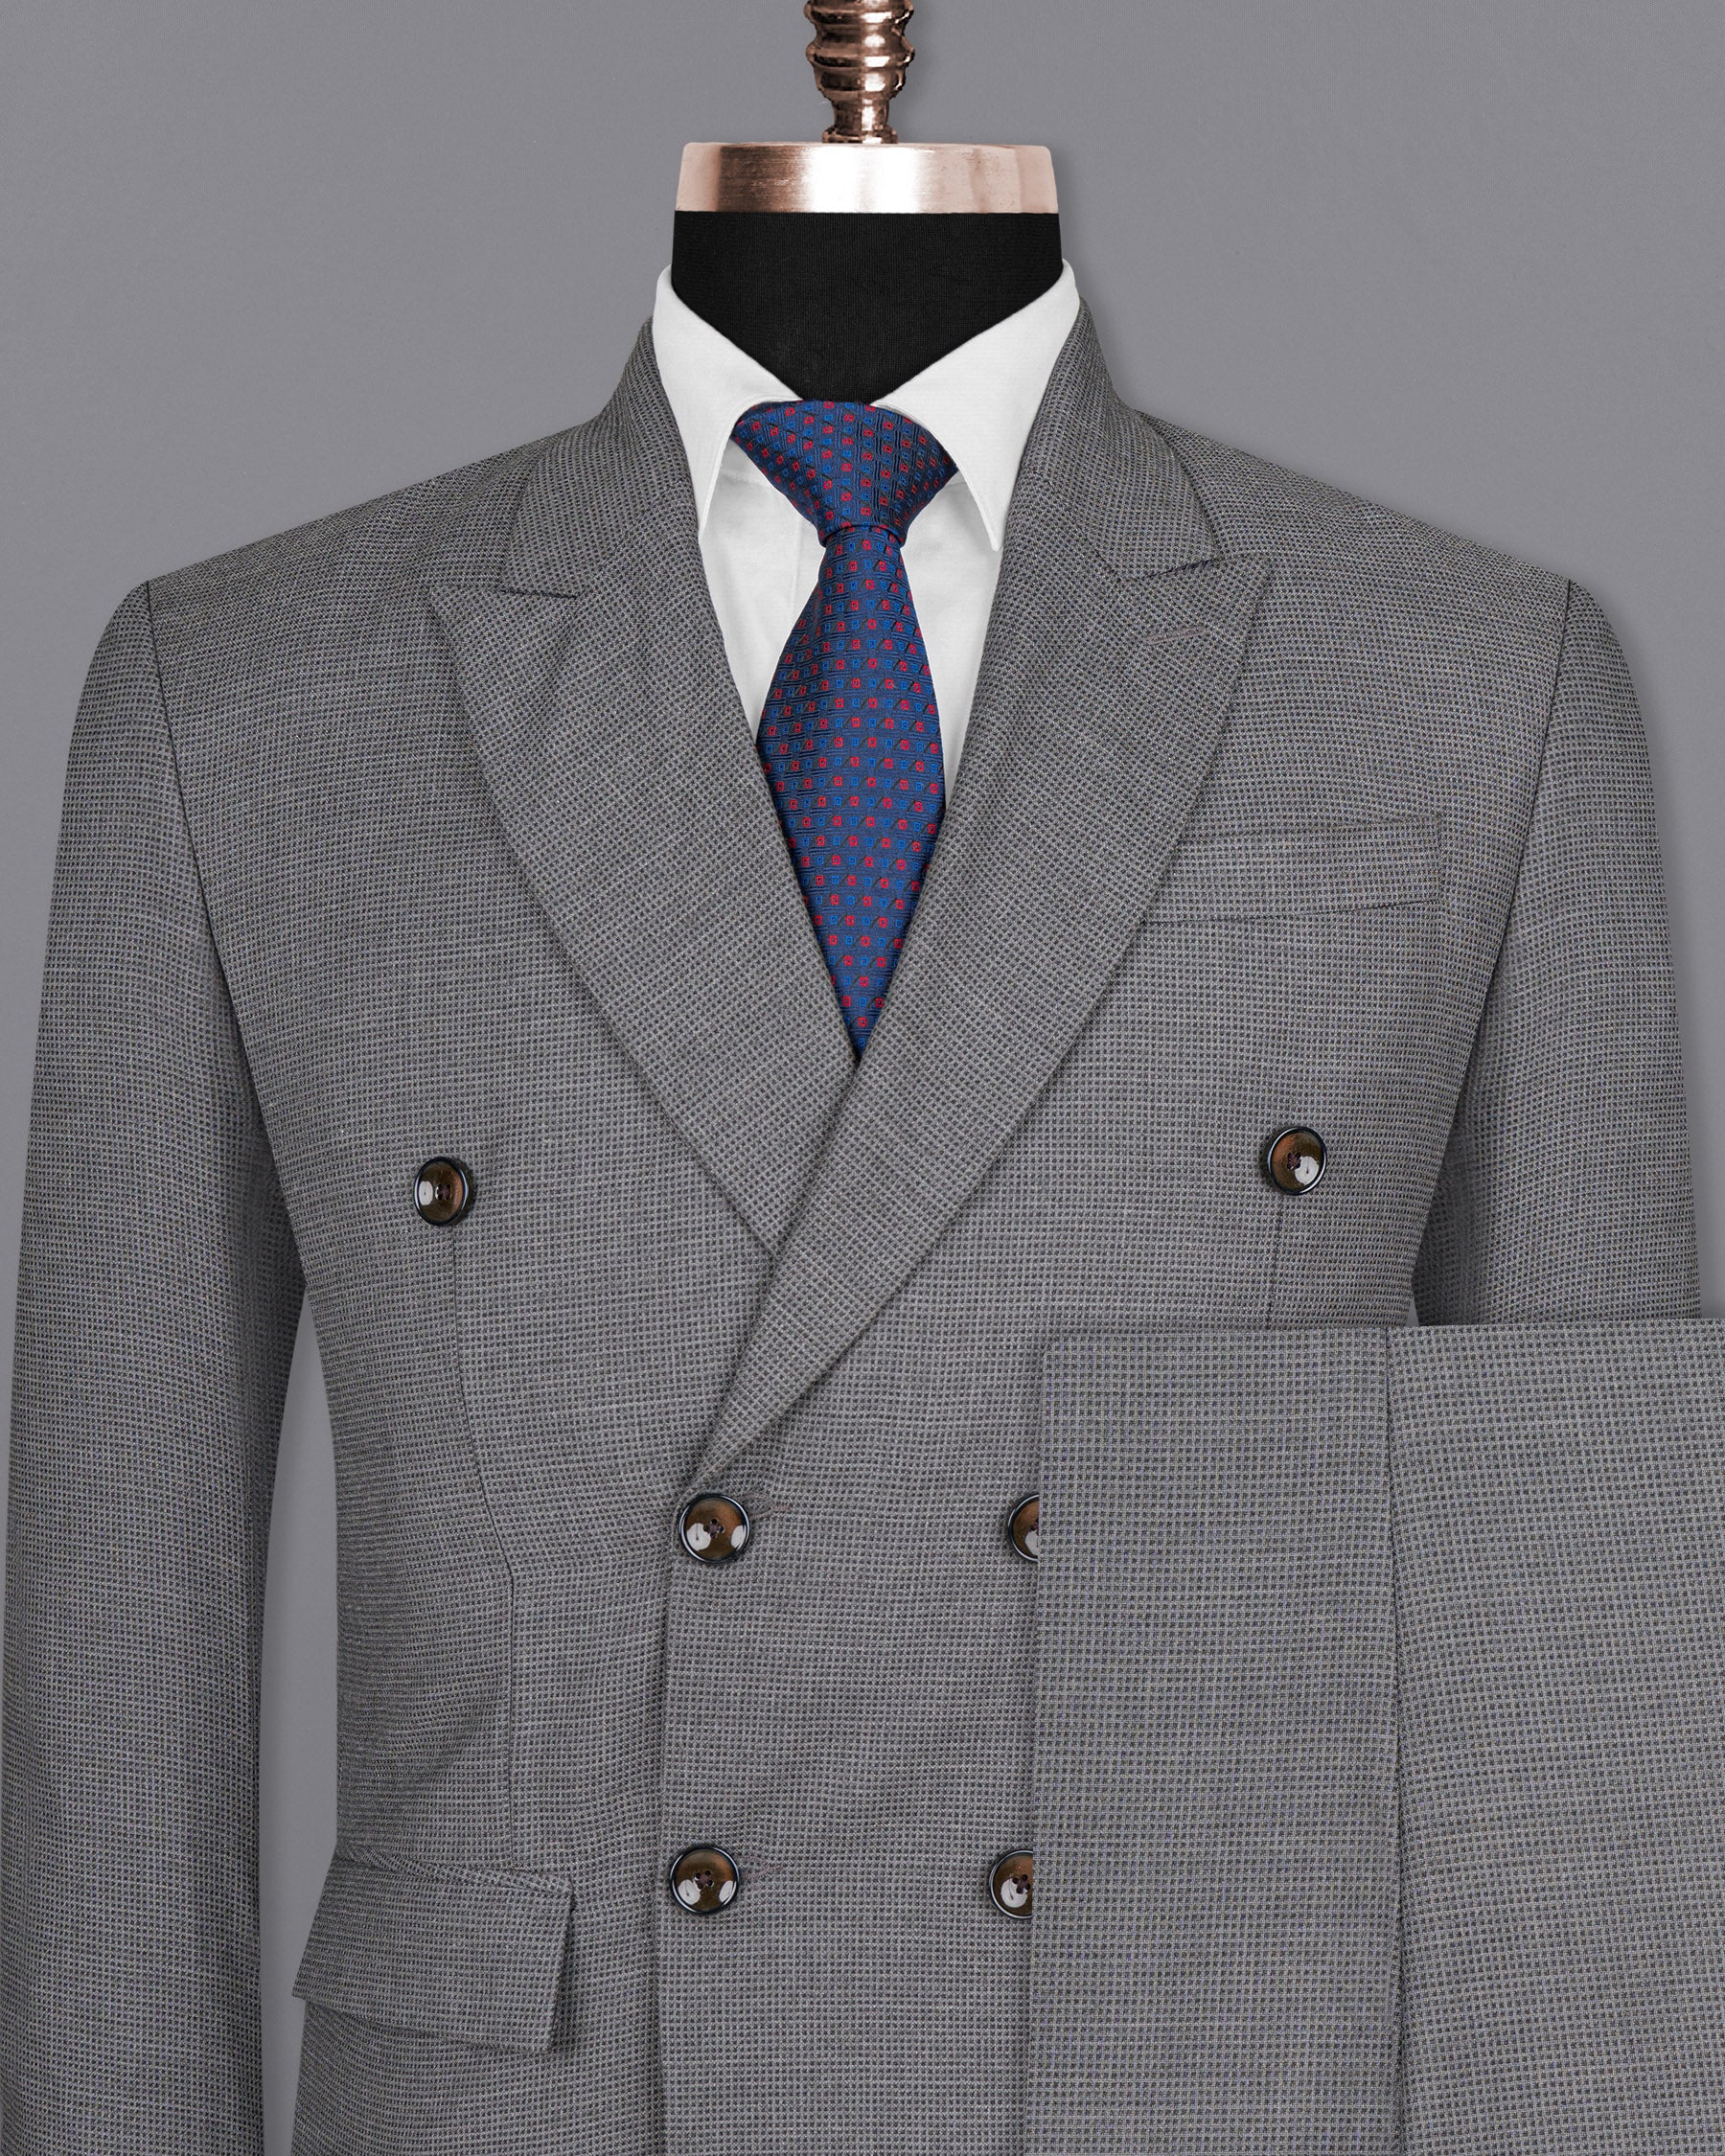 Boulder Grey Double Breasted Woolrich suit ST1579-DB-36, ST1579-DB-38, ST1579-DB-40, ST1579-DB-42, ST1579-DB-44, ST1579-DB-46, ST1579-DB-48, ST1579-DB-50, ST1579-DB-52, ST1579-DB-54, ST1579-DB-56, ST1579-DB-58, ST1579-DB-60